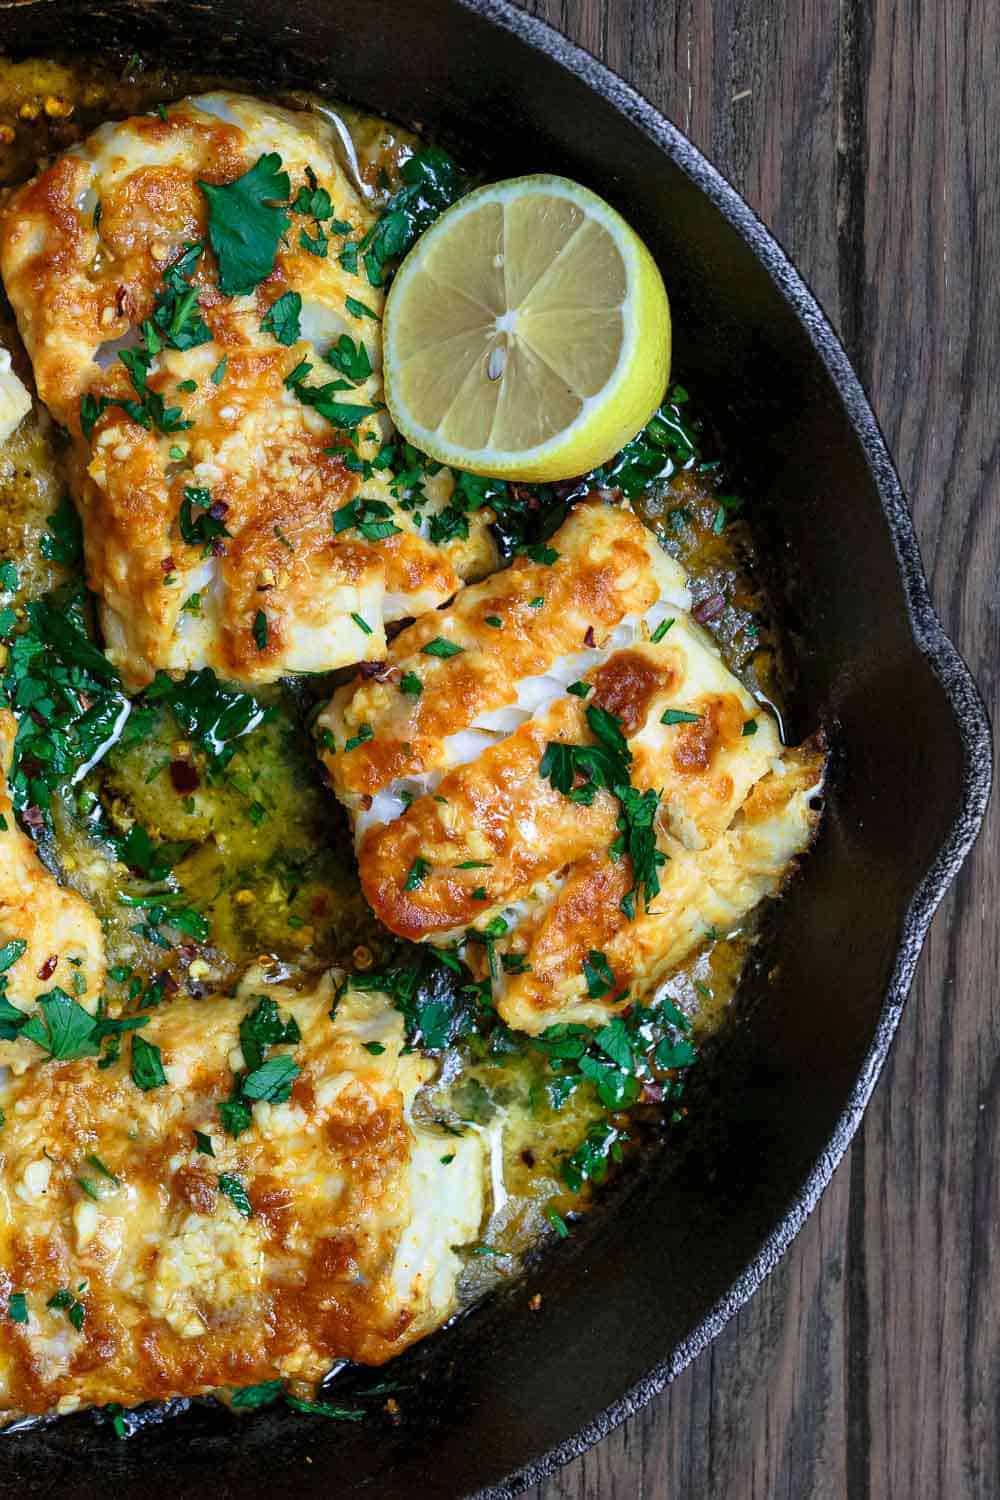 Greek-Style Baked Cod Recipe with Lemon and Garlic | The Mediterranean Dish. Easy, weeknight dinner! Baked cod, spiced Greek-style and baked with fresh lemon juice, olive oil and garlic. Takes 15 minutes or less in your oven! #greekfood #codrecipe #mediterraneanrecipe #bakedcod #bakedfish #onepandinner